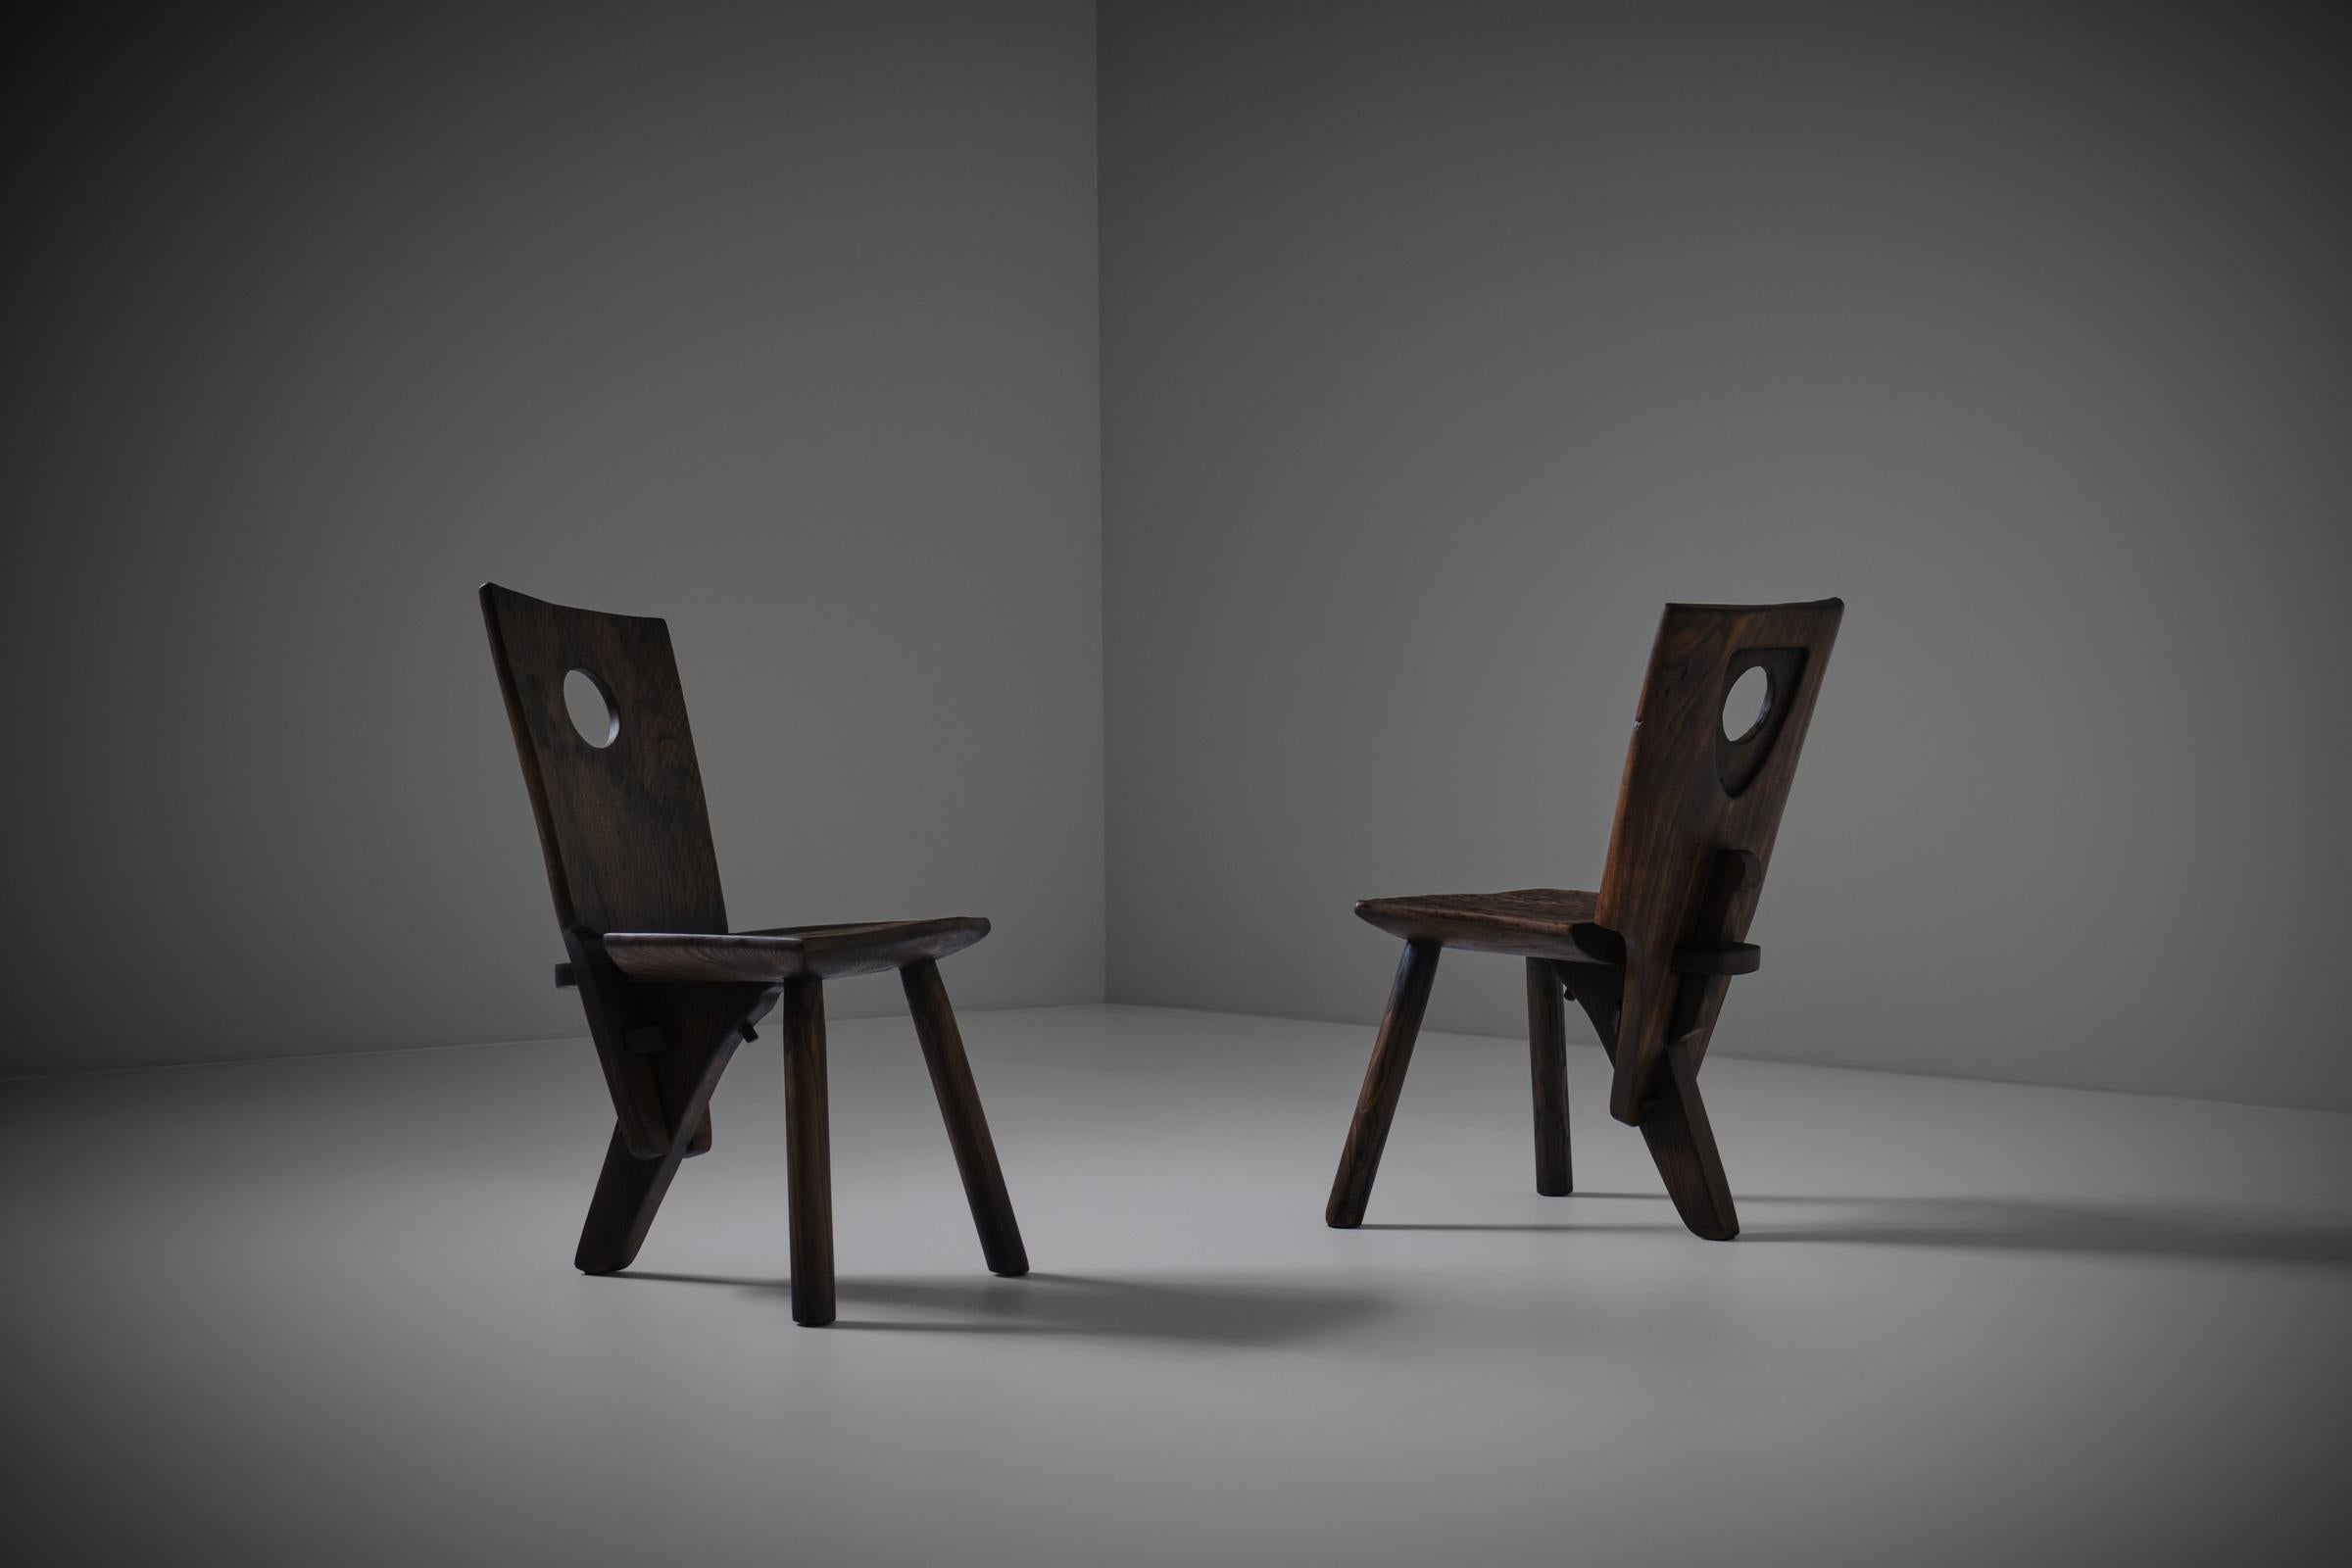 Solid elm wooden Art Populaire chairs, France 1960s. Beautiful primitive tripod chairs out of dark stained solid Elm wood. Interesting primitive authentic clamp construction resulting in a very sculptural appearance. The chairs shows many